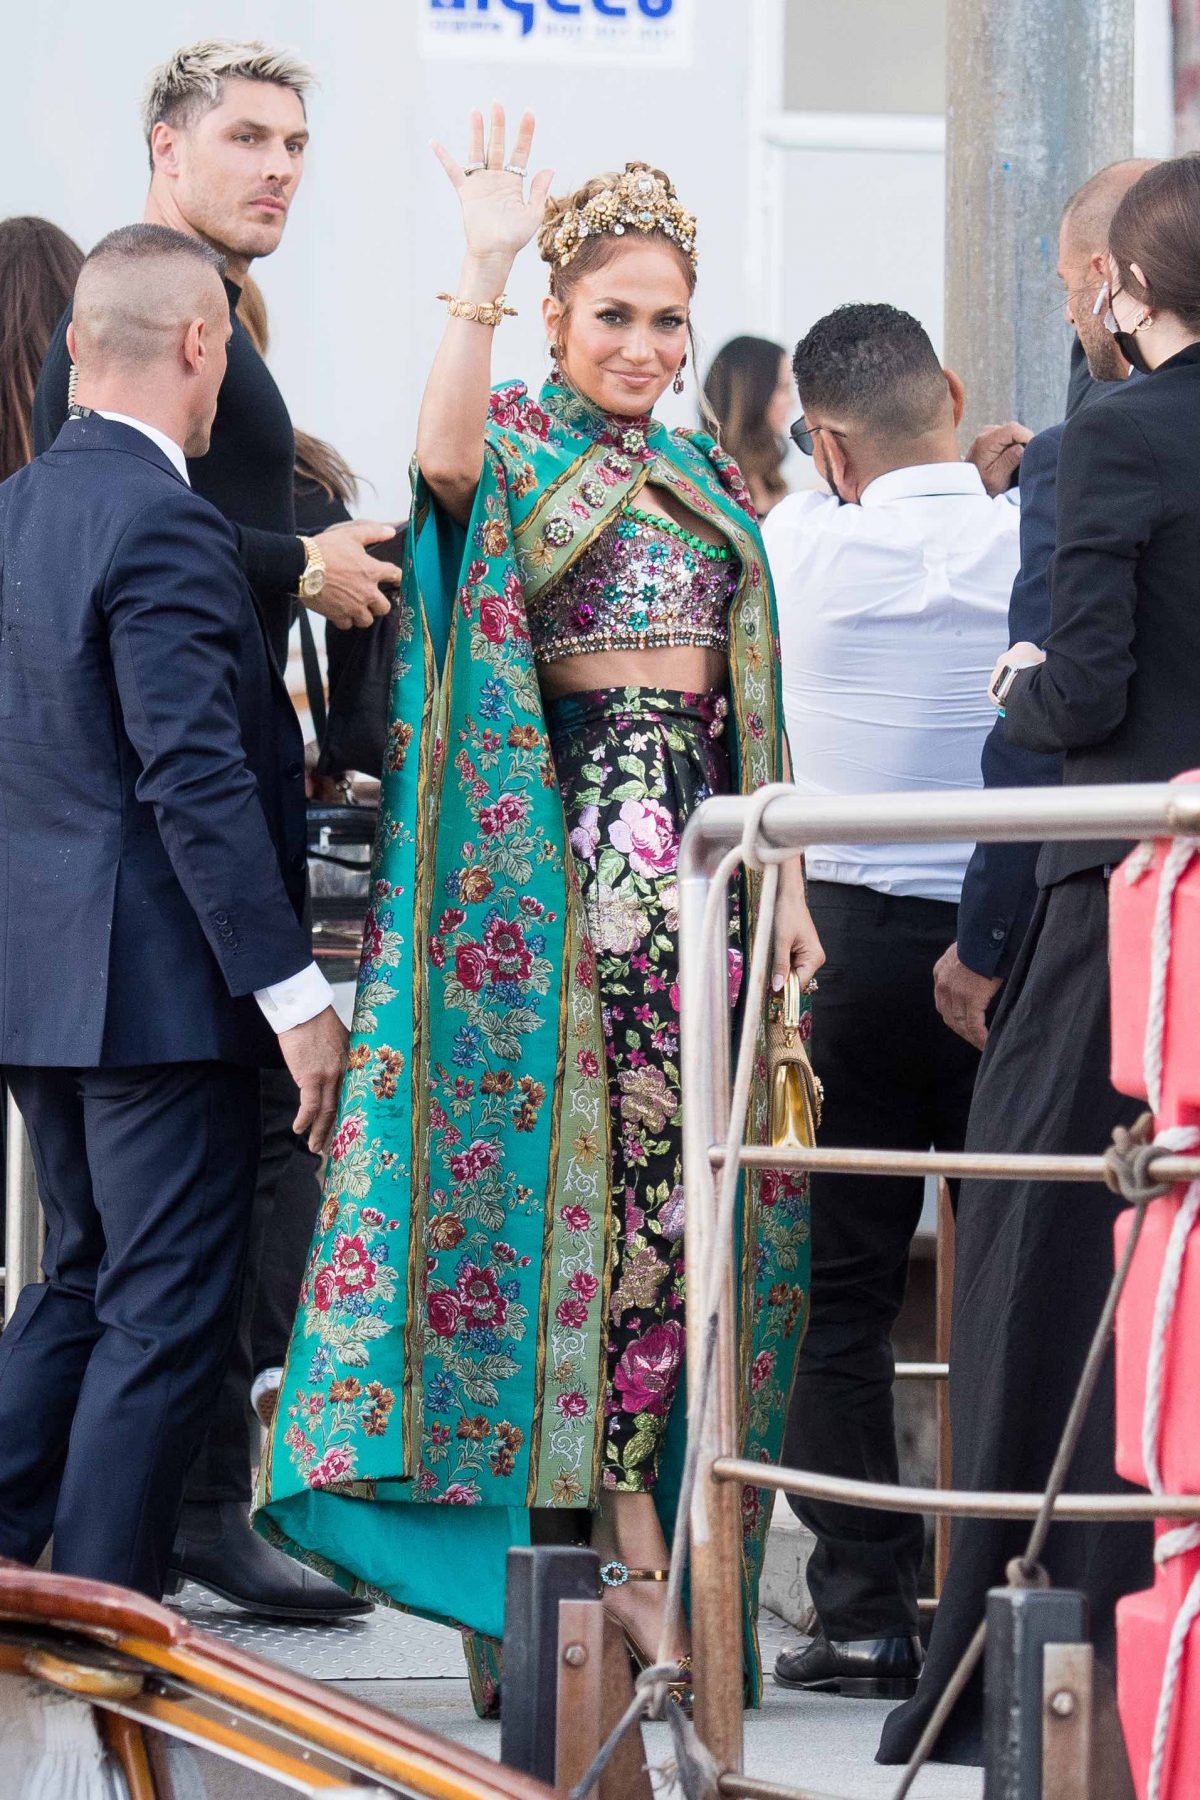 ennifer Lopez is seen during the Dolce&Gabbana Alta Moda show on August 29, 2021 in Venice, Italy.